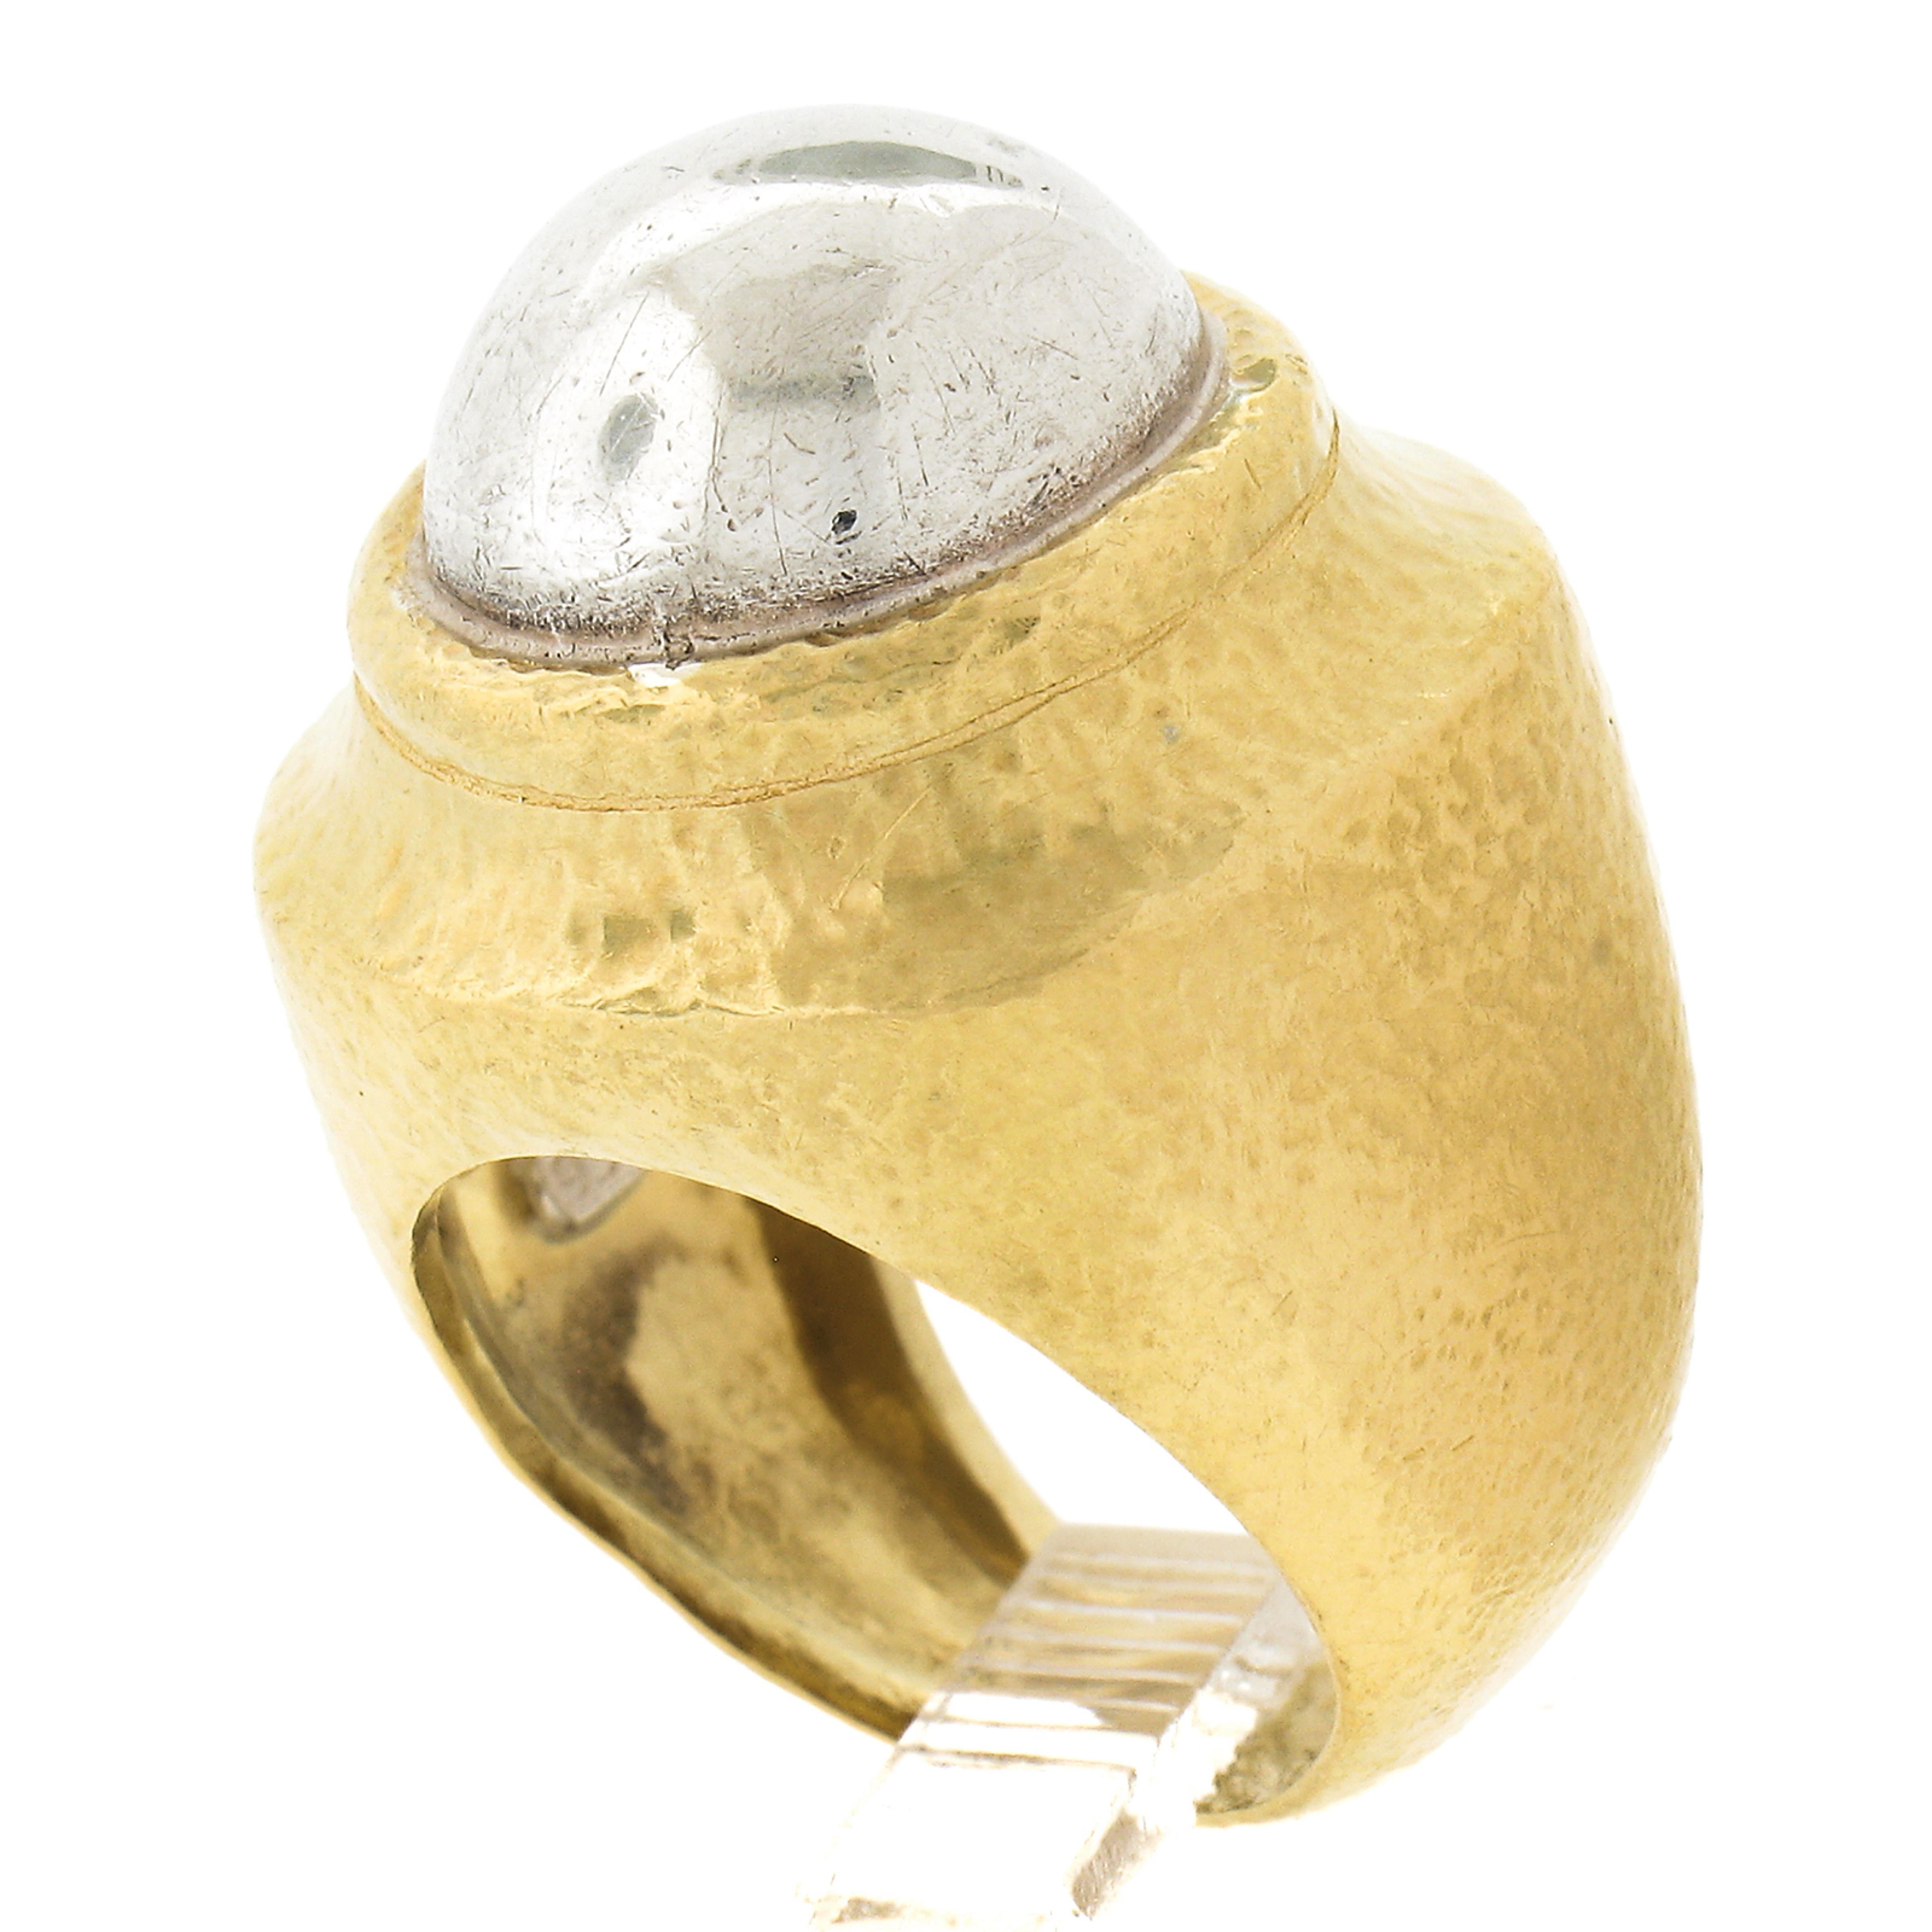 Zolotas 22k Yellow Gold & Silver Center Hammered Finish Statement Cocktail Ring For Sale 5